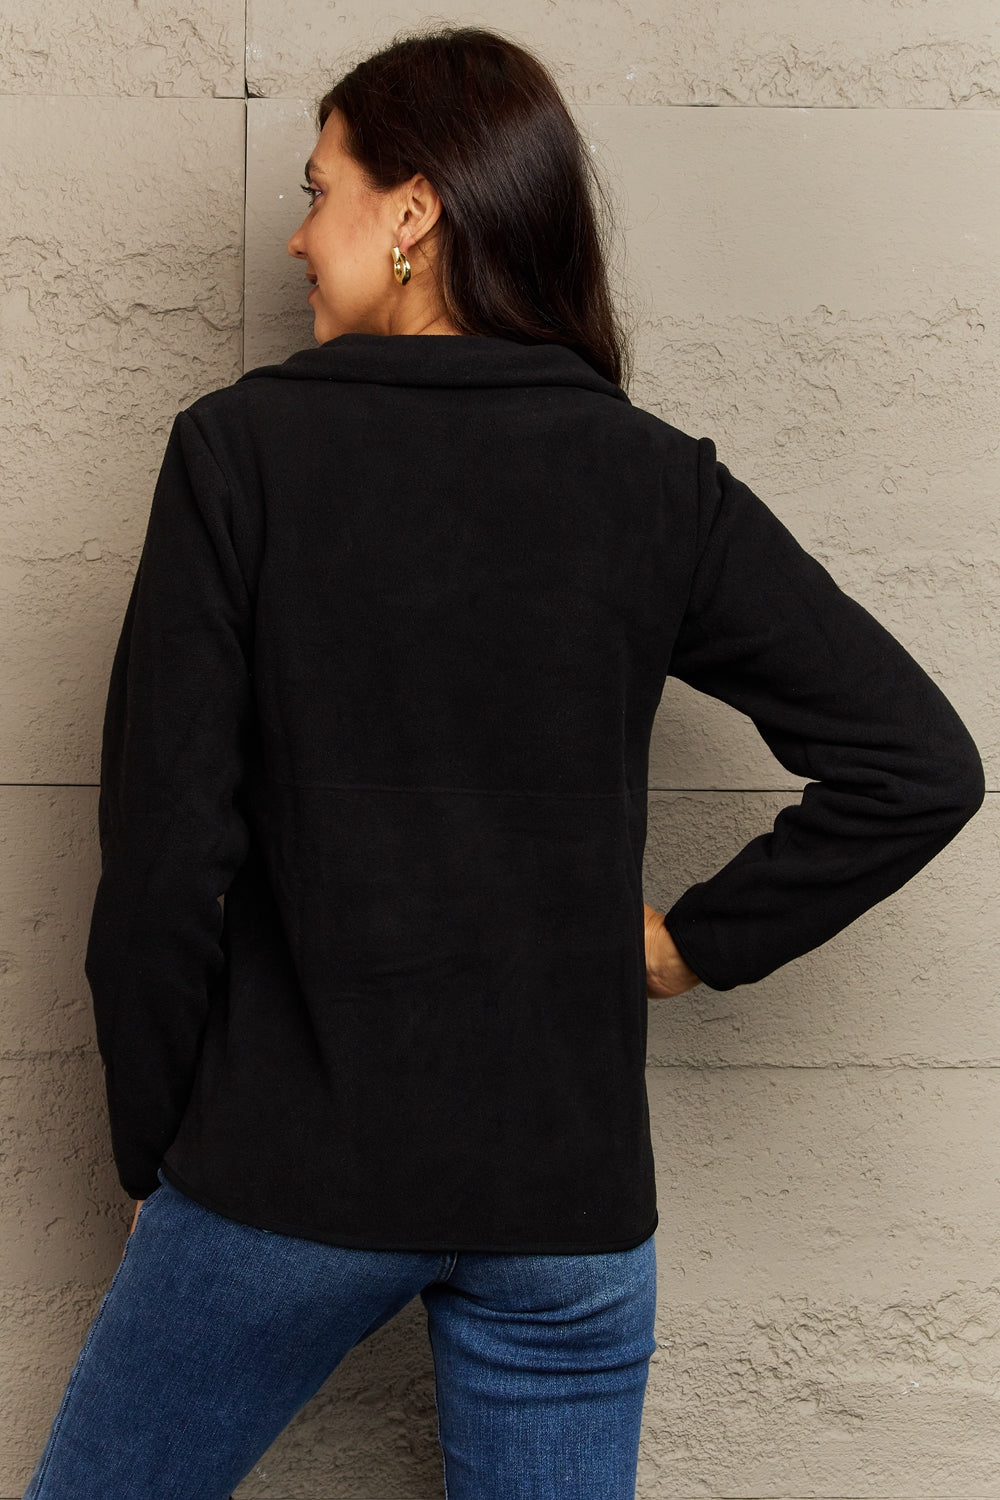 Back View, Ninexis, Collared Neck Zip-Up Jacket with Pocket